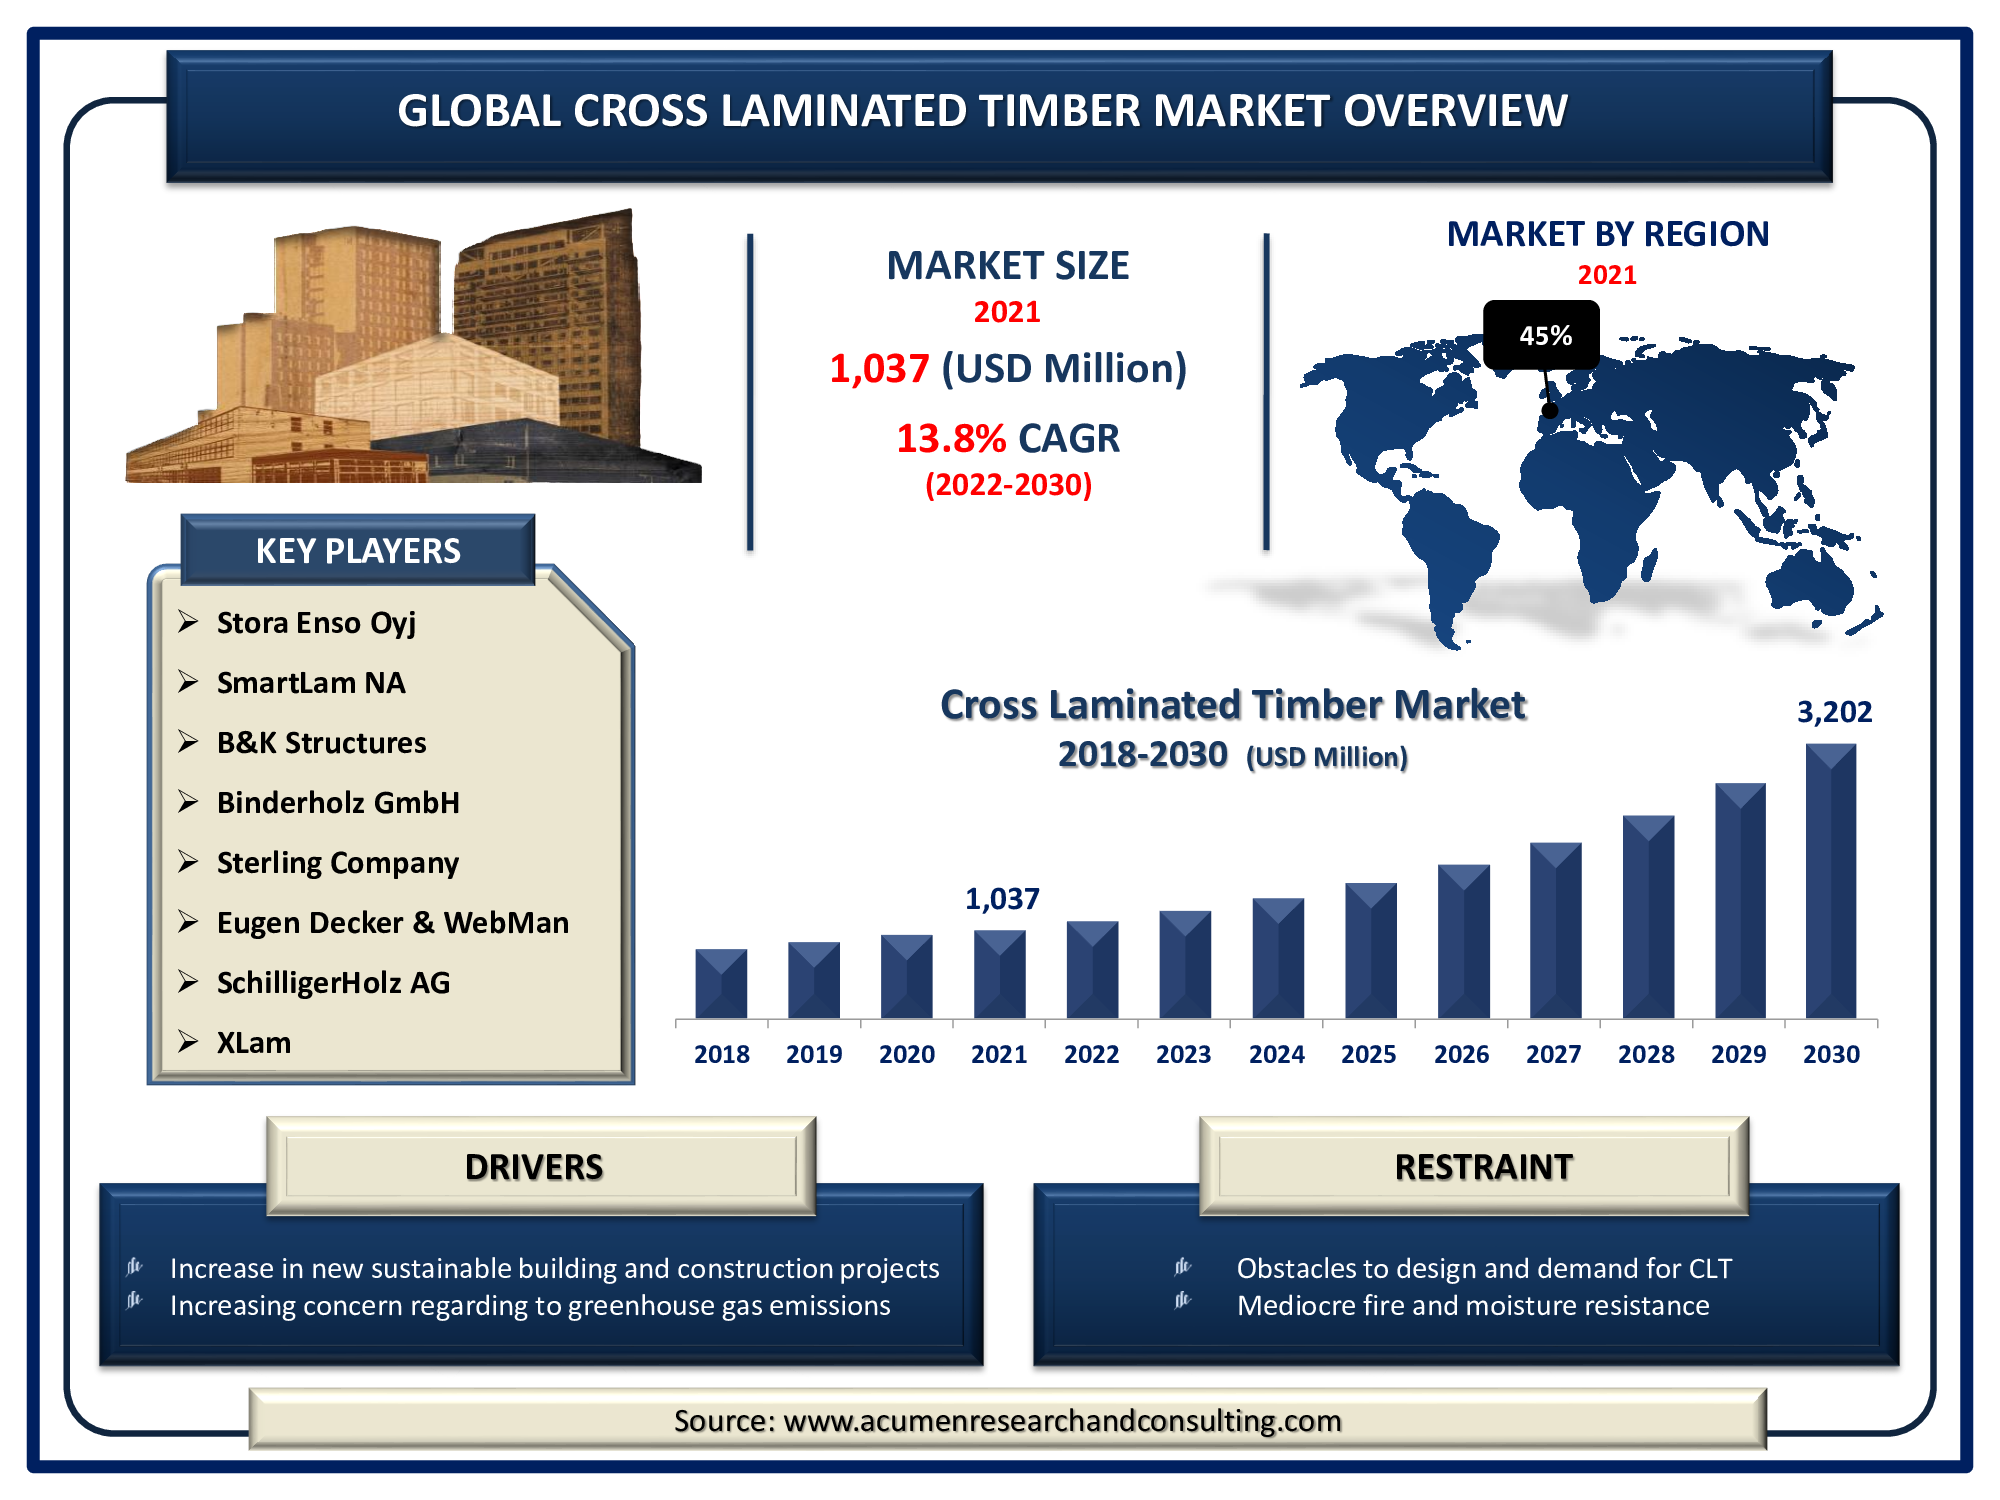 Cross Laminated Timber Market Size accounted for USD 1,037 Million in 2021 and is expected to reach USD 3,202 Million by 2030 with a considerable CAGR of 13.8% during the forecast timeframe from 2022 to 2030.